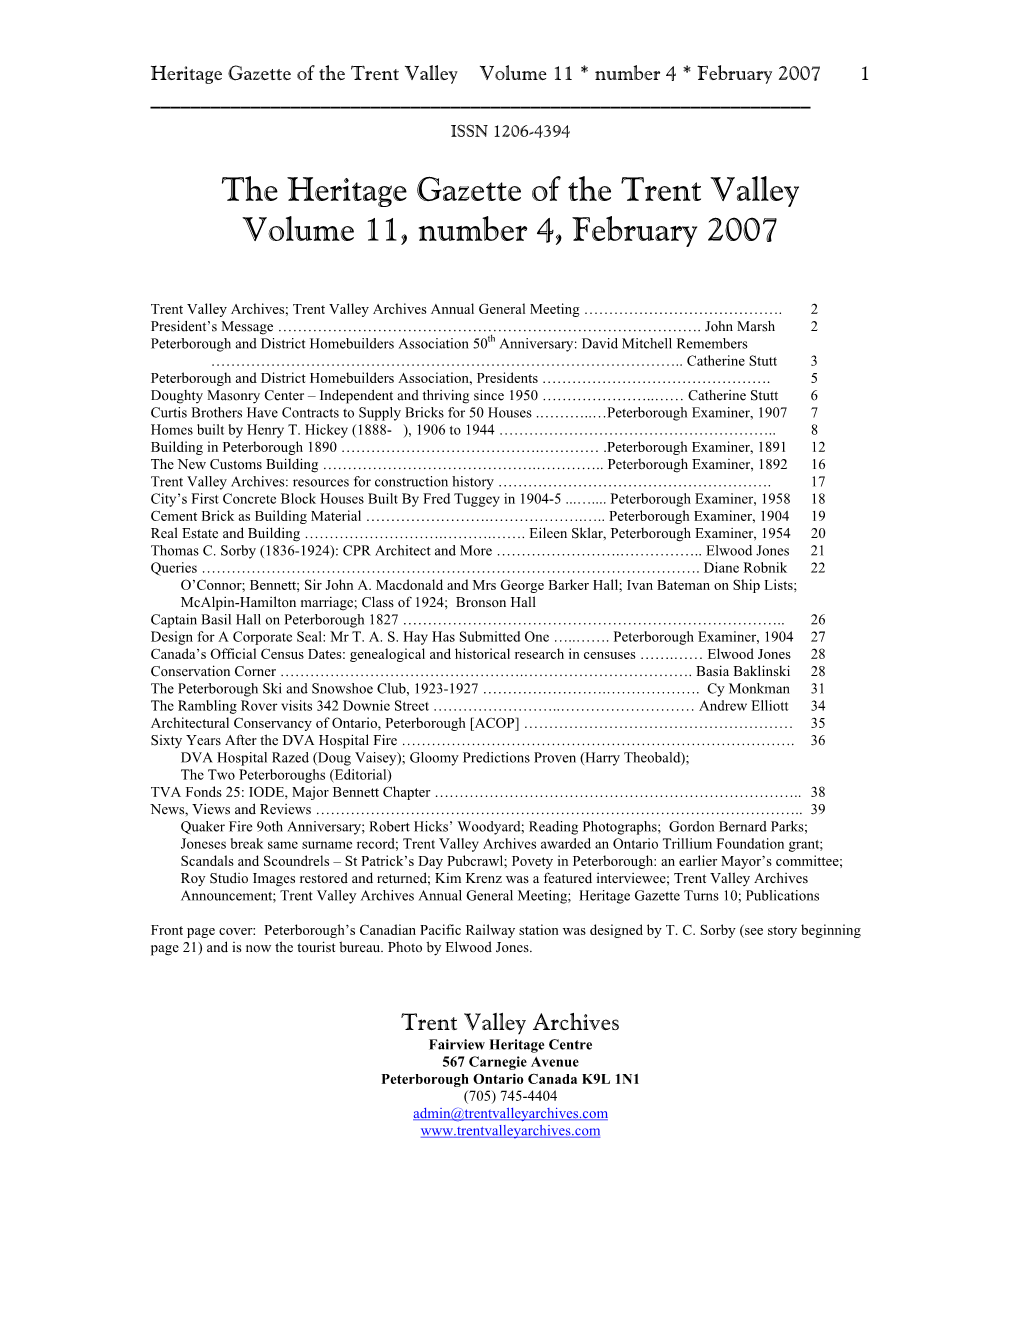 The Heritage Gazette of the Trent Valley Volume 11, Number 4, February 2007